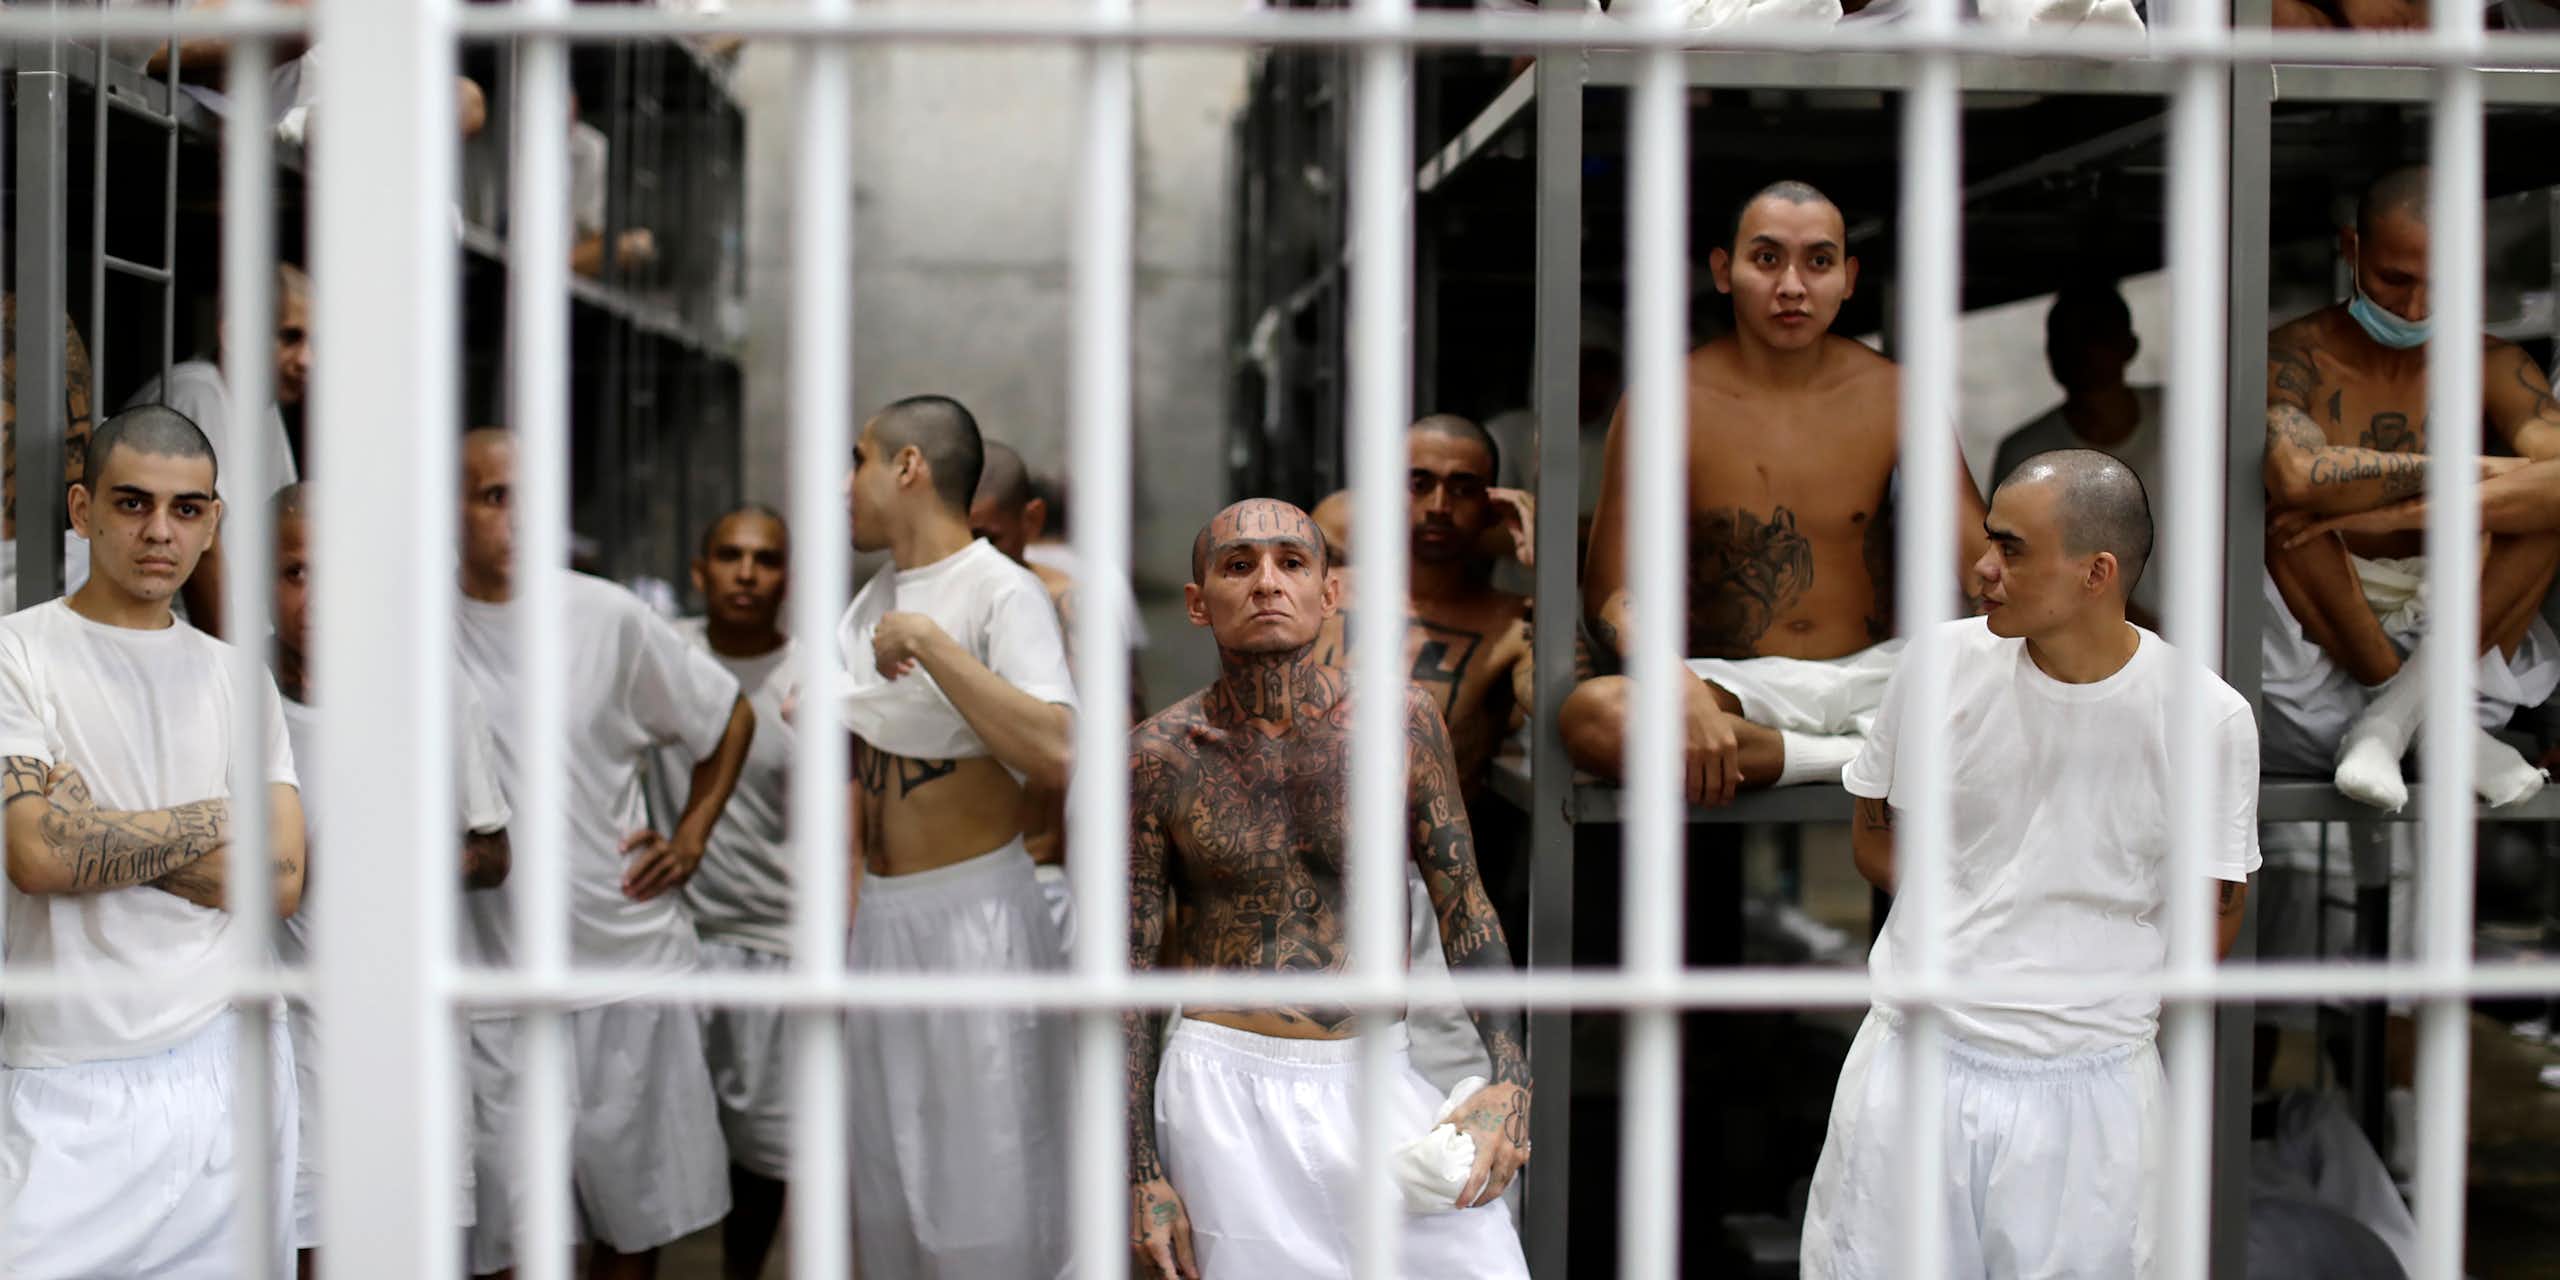 A group of heavily tattooed gang members in their prison cell.